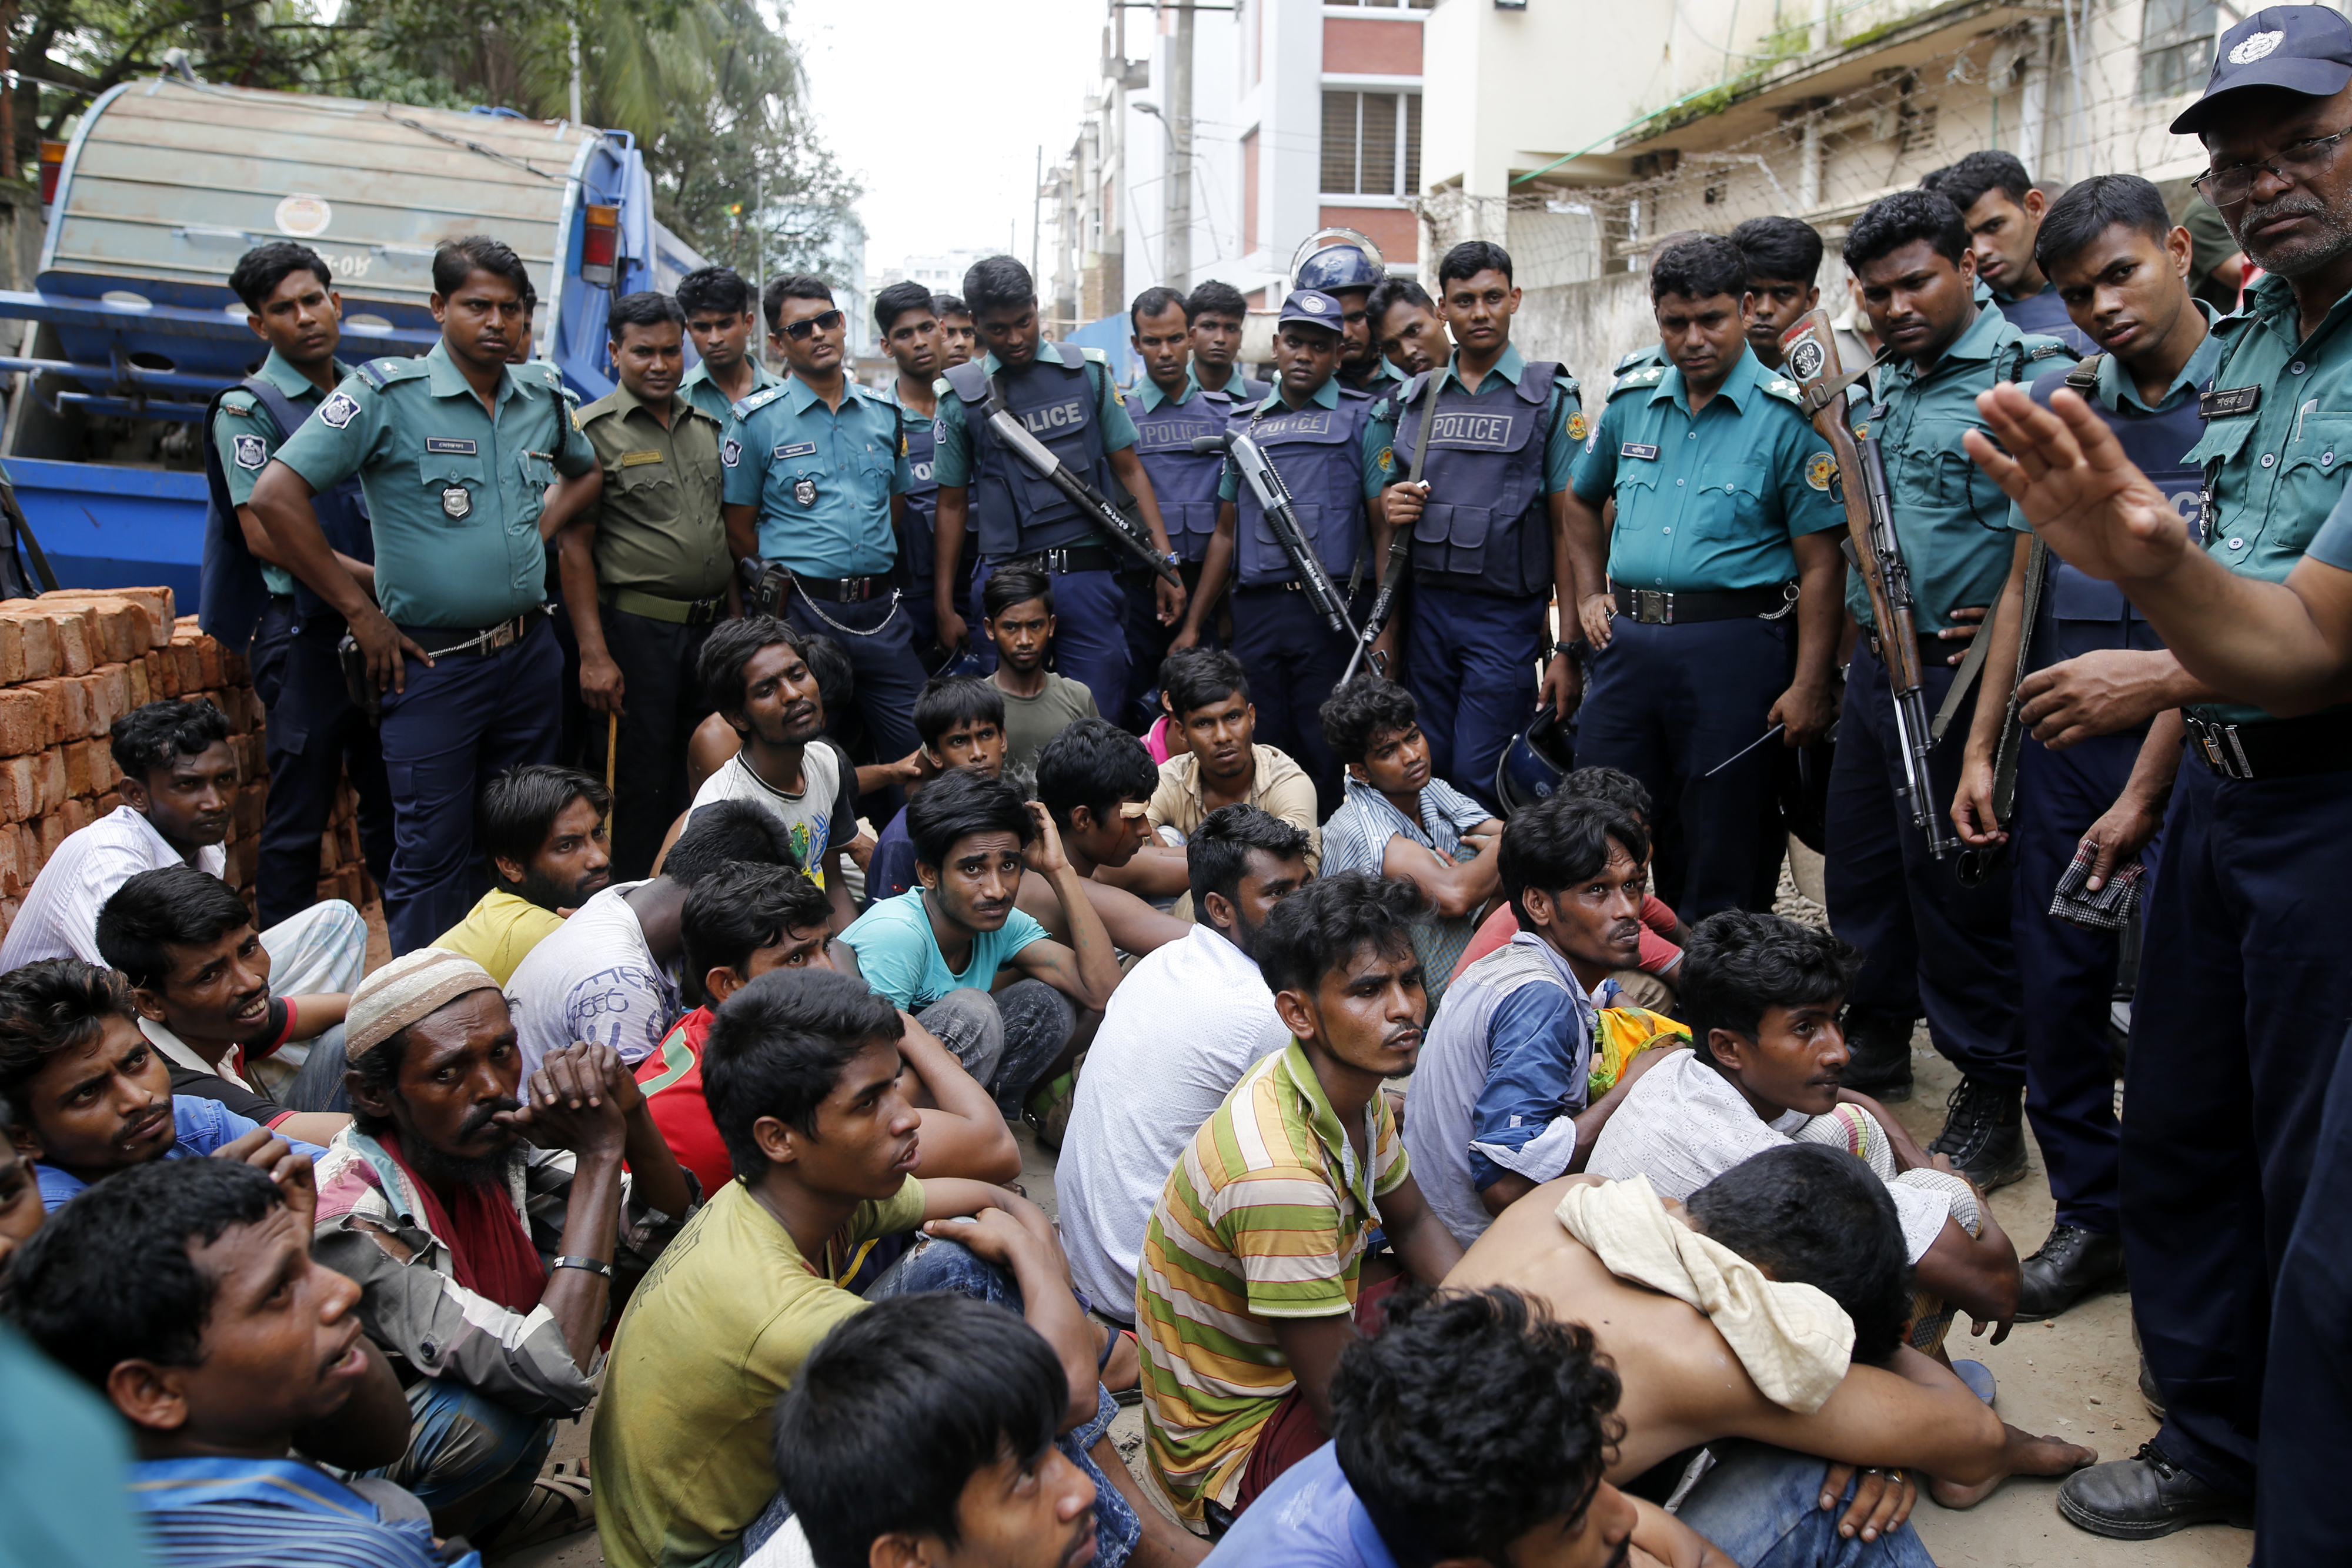 Several suspected drug dealers detained during the countrywide ongoing anti-drug operation in Dhaka, Bangladesh on May 28, 2018. (Rehman Asad—NurPhoto/Getty Images)